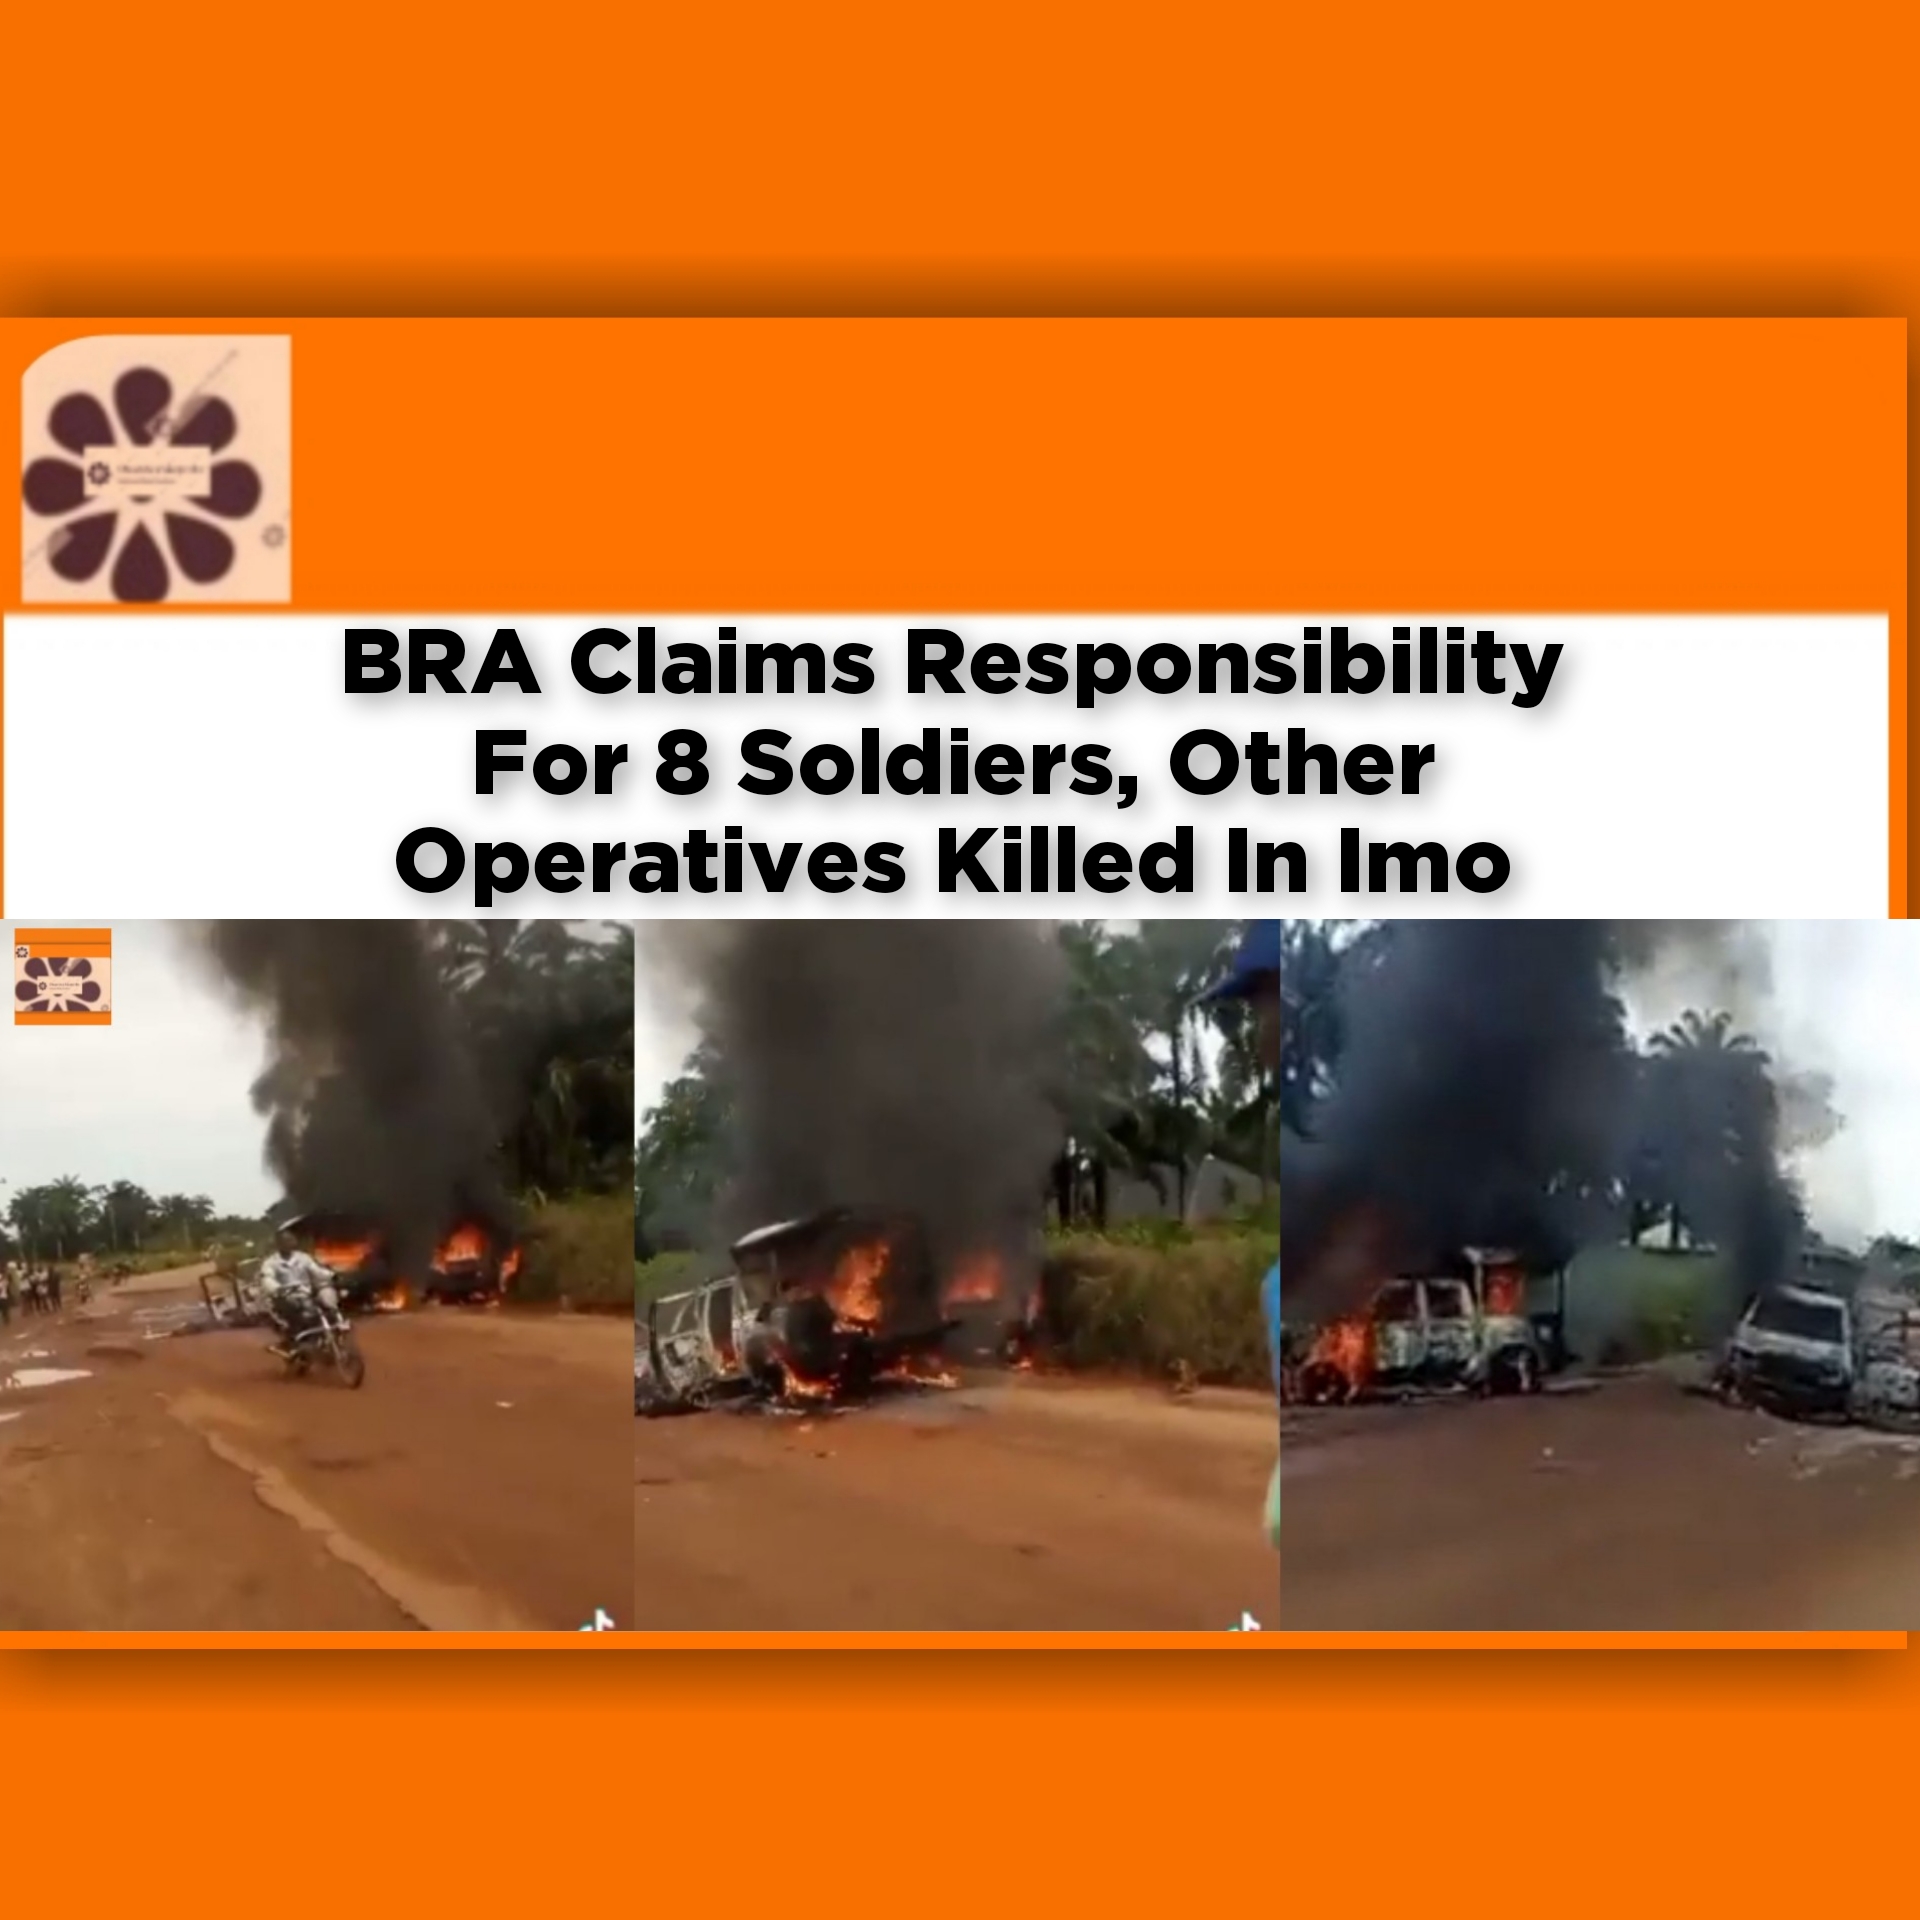 BRA Claims Responsibility For 8 Soldiers, Other Operatives Killed In Imo ~ OsazuwaAkonedo Nigeria Newspapers